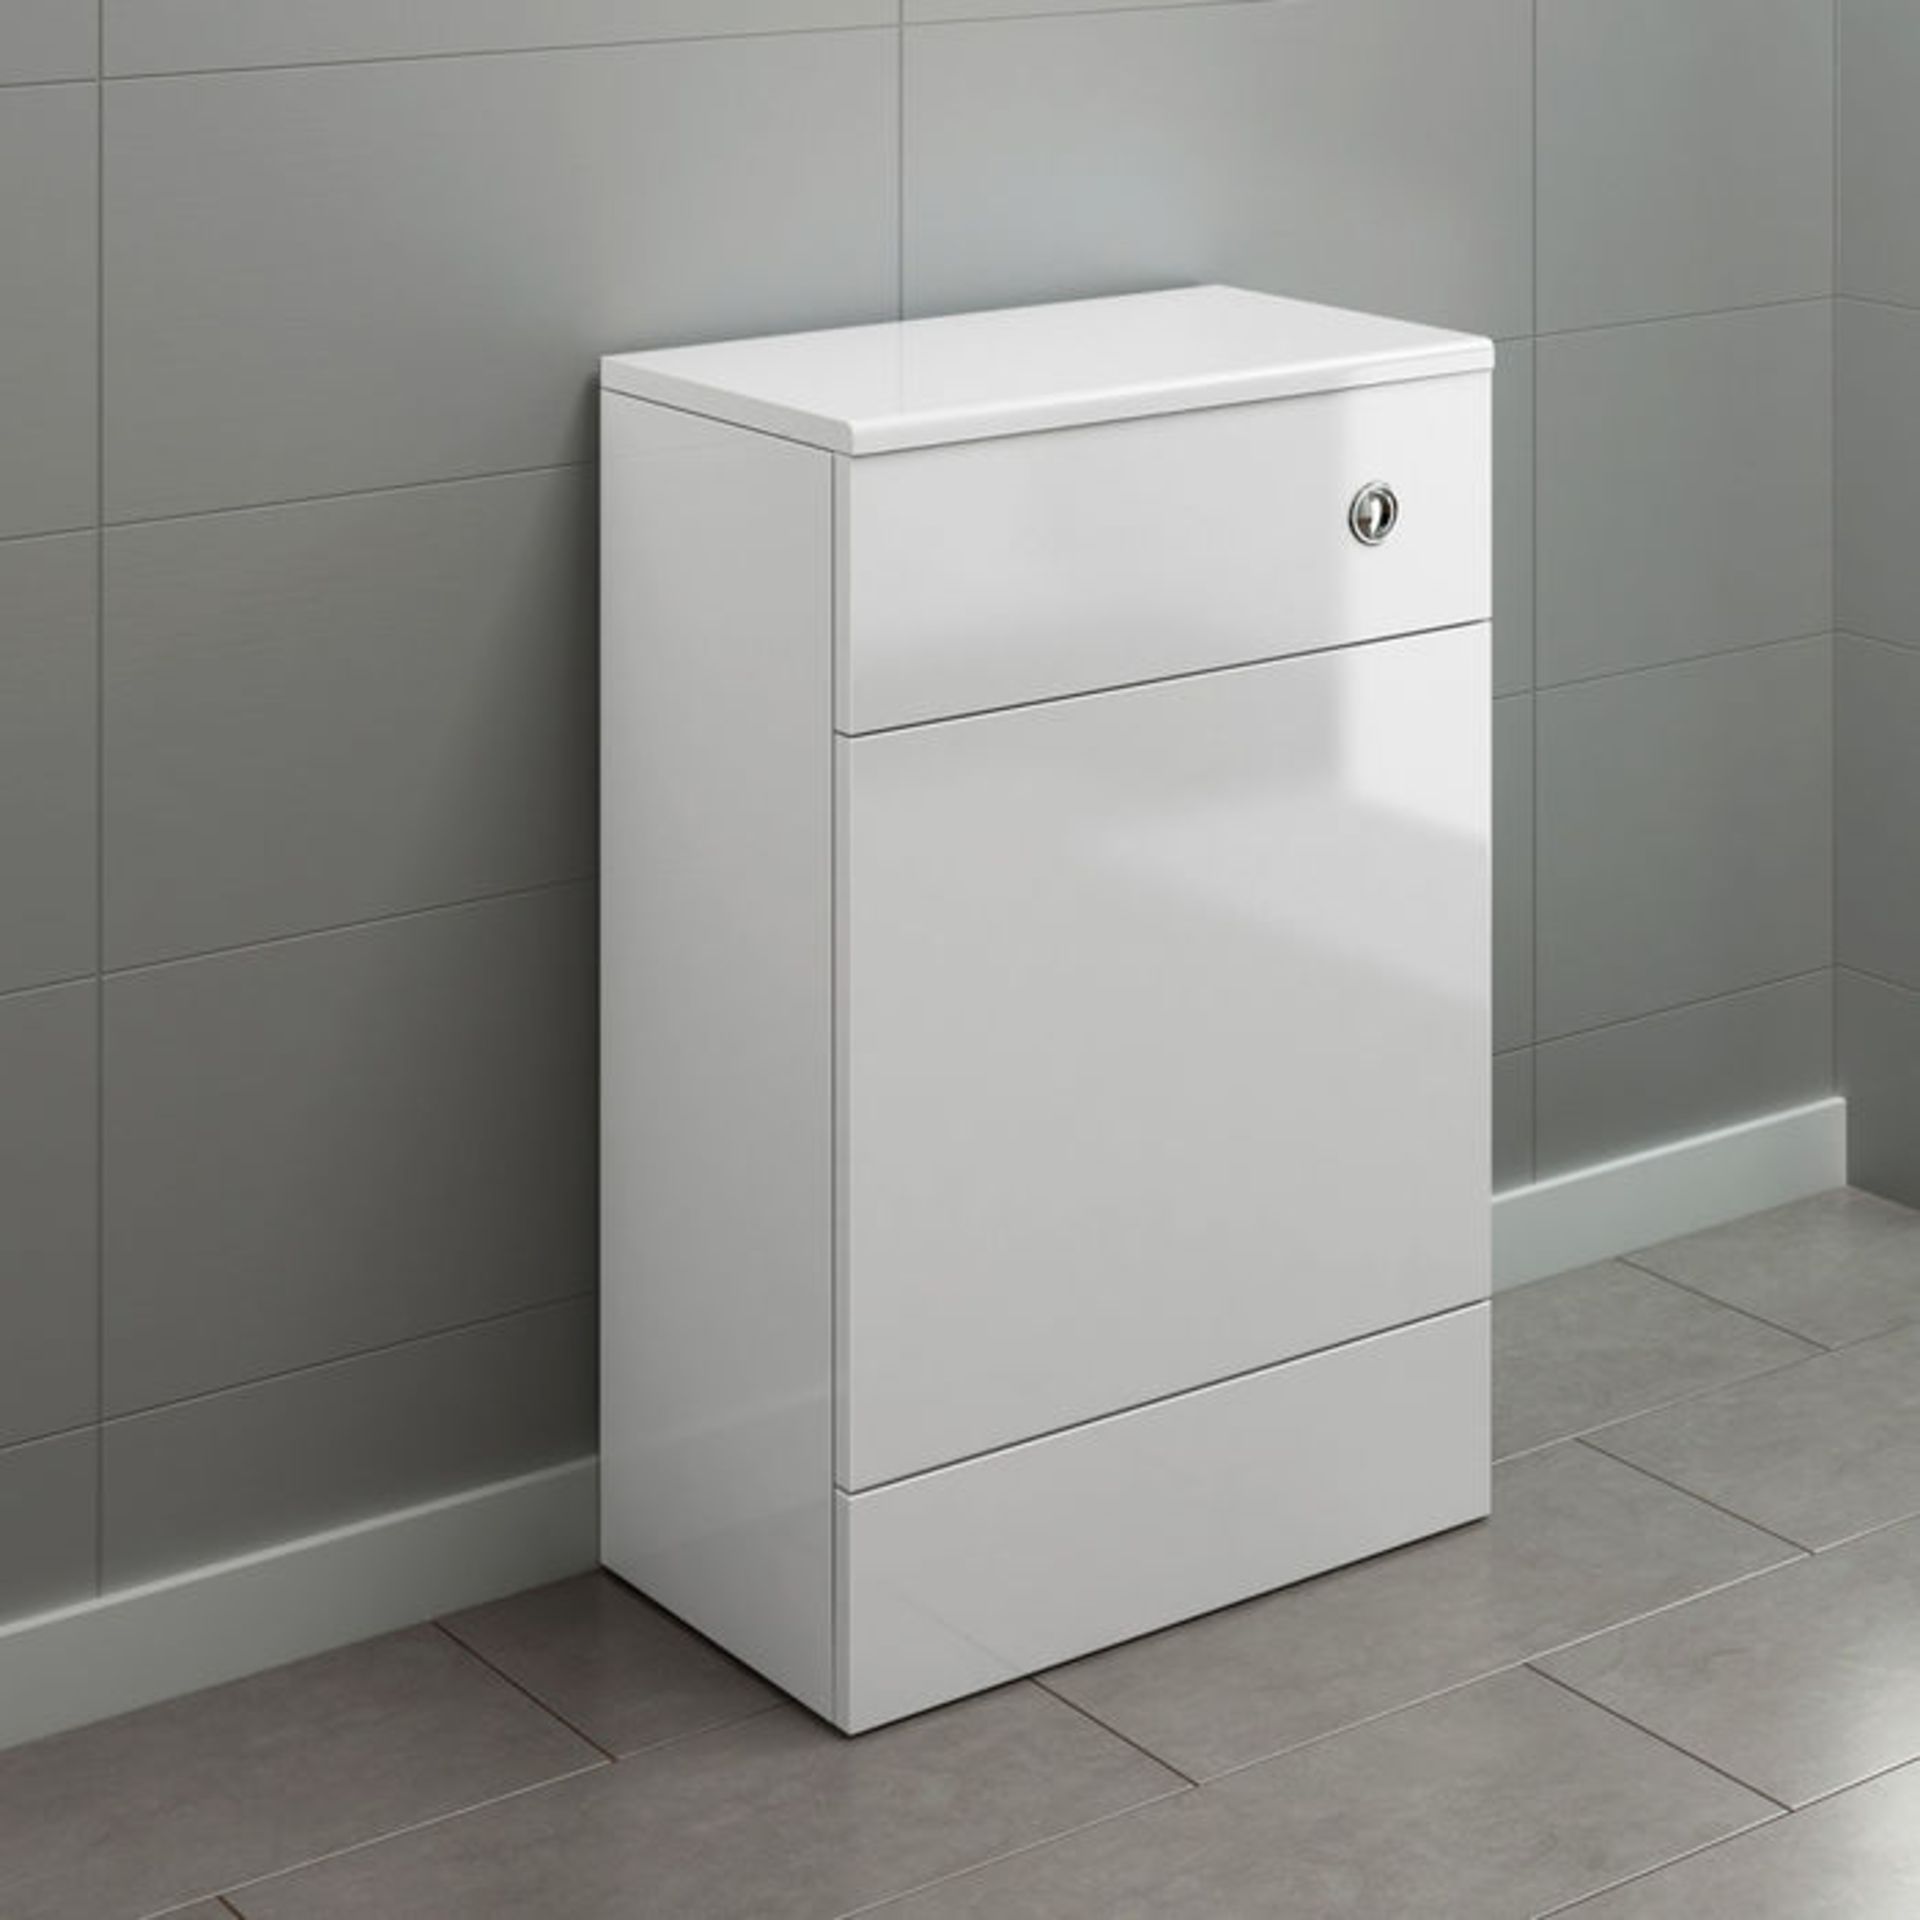 (G81) 500mm Harper Gloss White Back To Wall Toilet Unit RRP £174.99 Our discreet unit cleverly